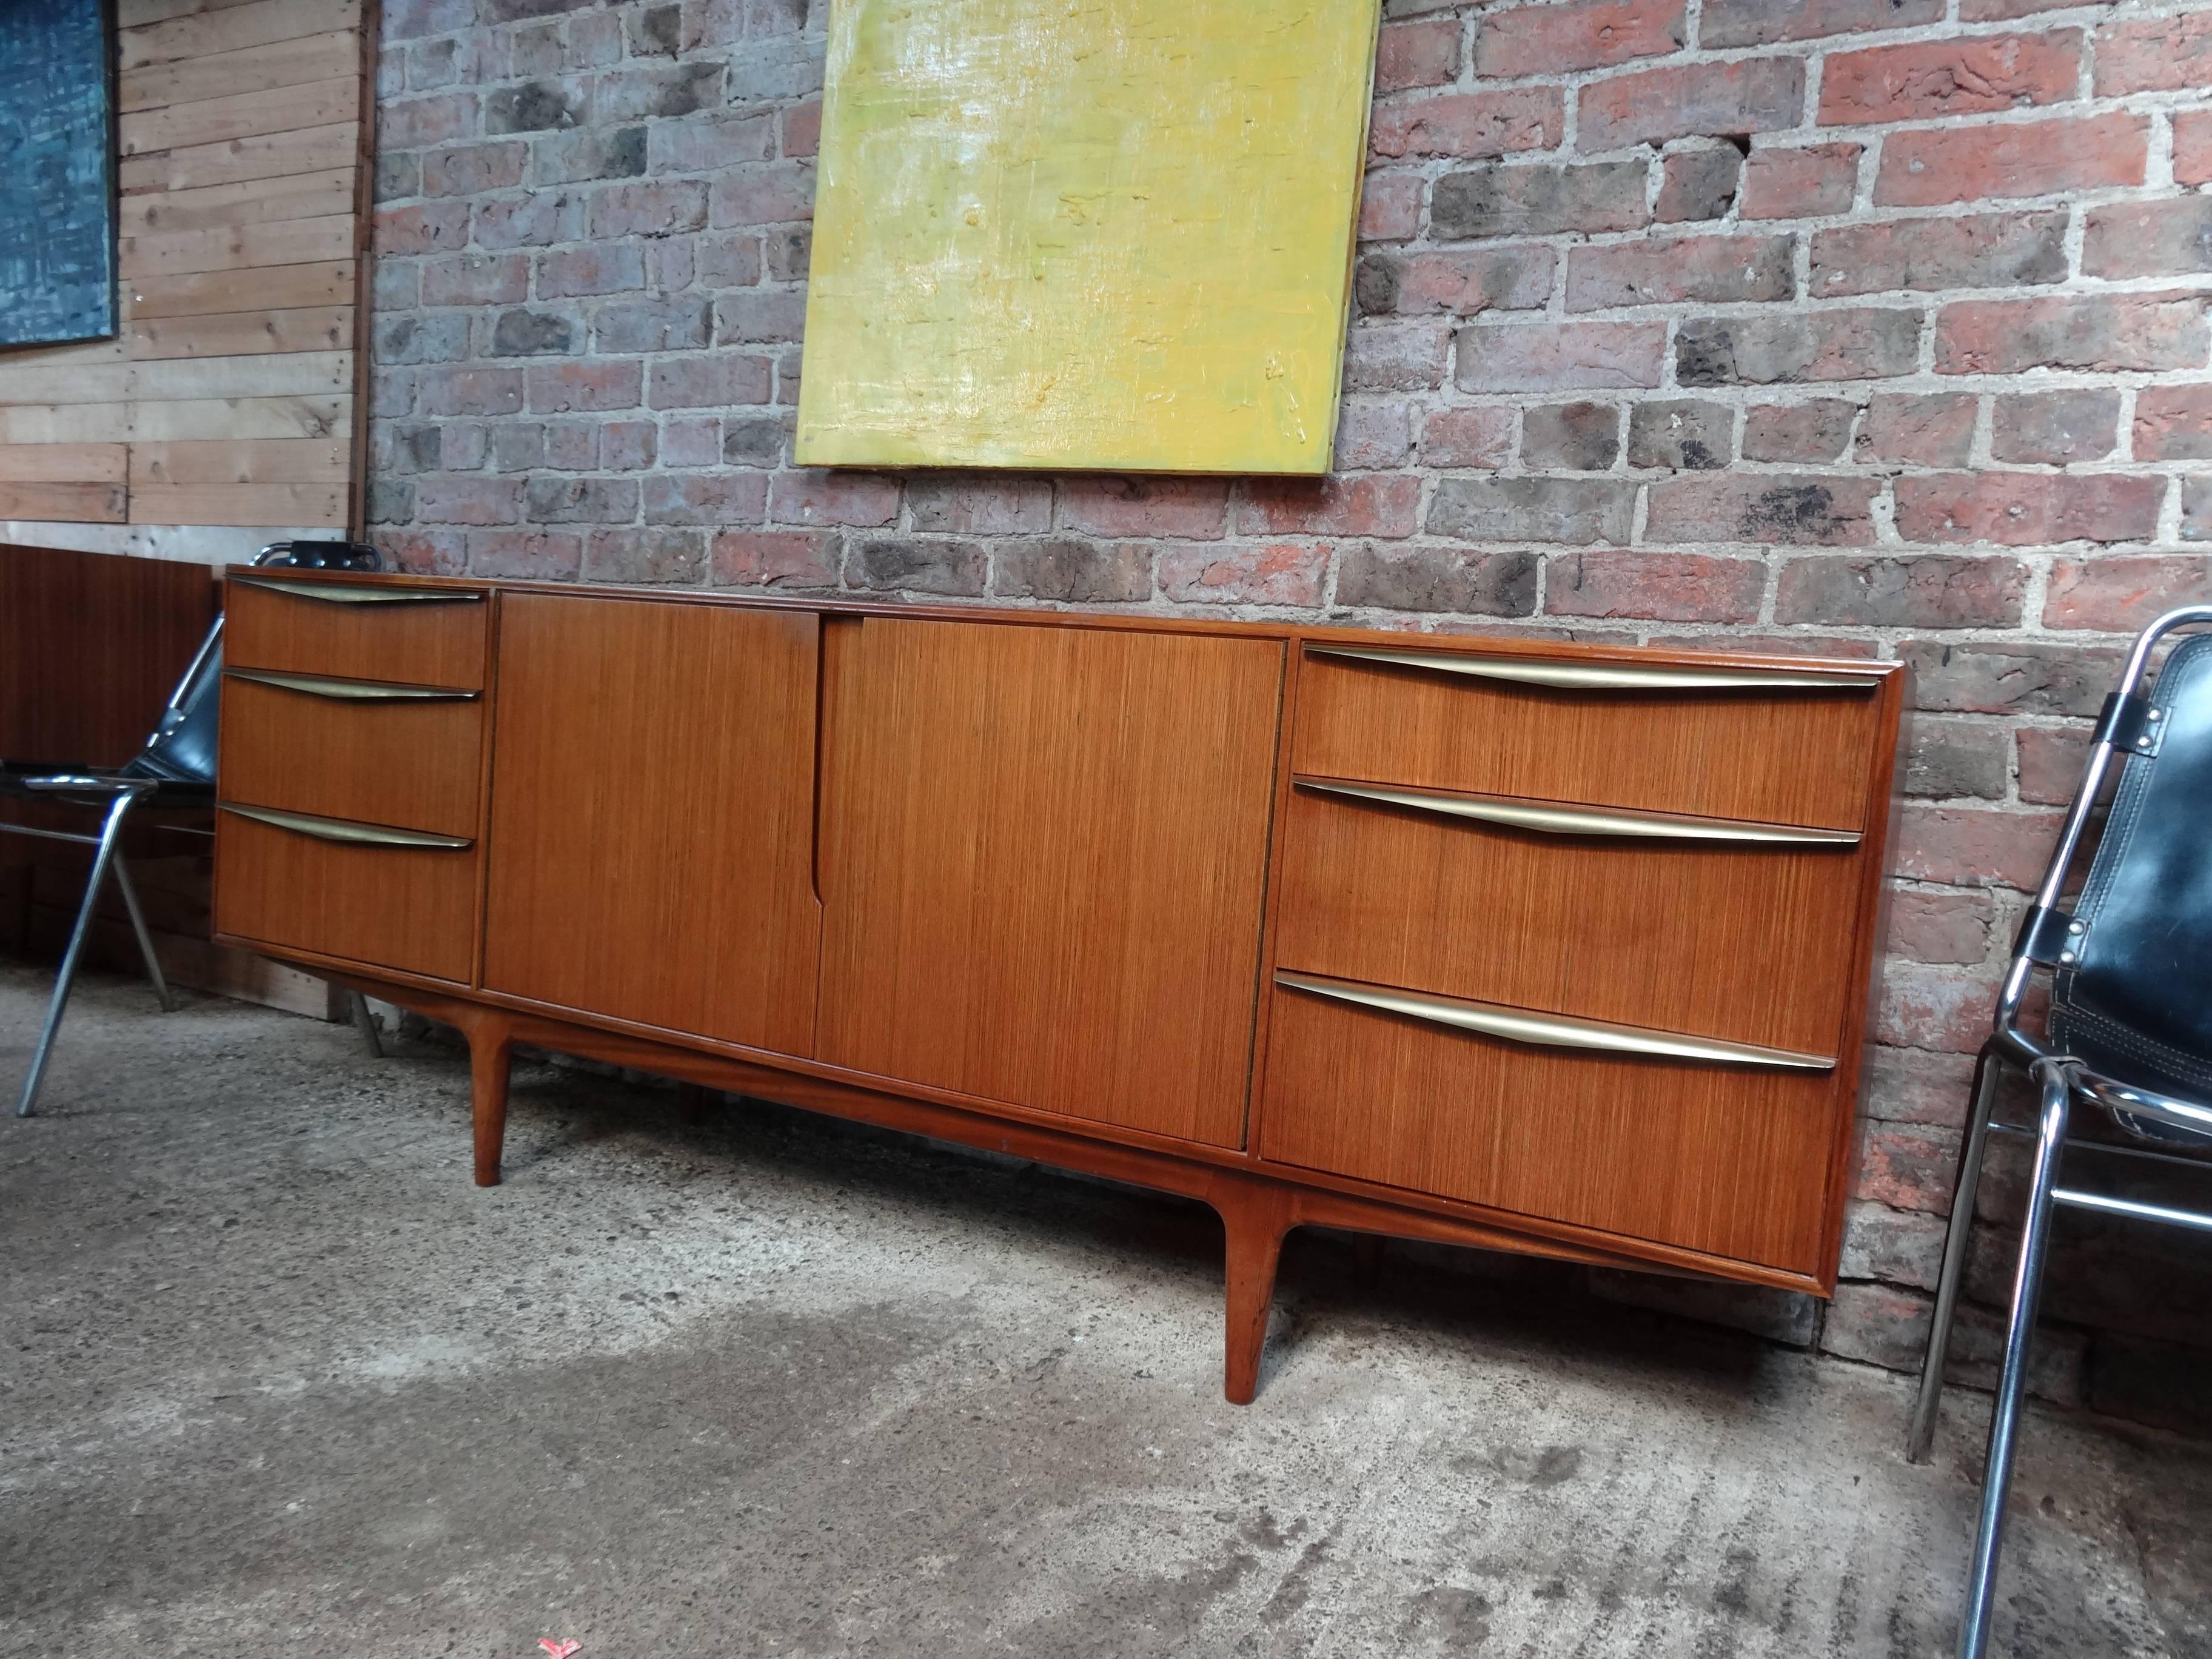 Most sought after vintage 1960s Mcintosh sideboard by Tom Robertson. It has three drawers with brass pull handles, cupboard space, and a drinks section with a useful pullout shelf. Credenza is in very good original condition. I have only seen two